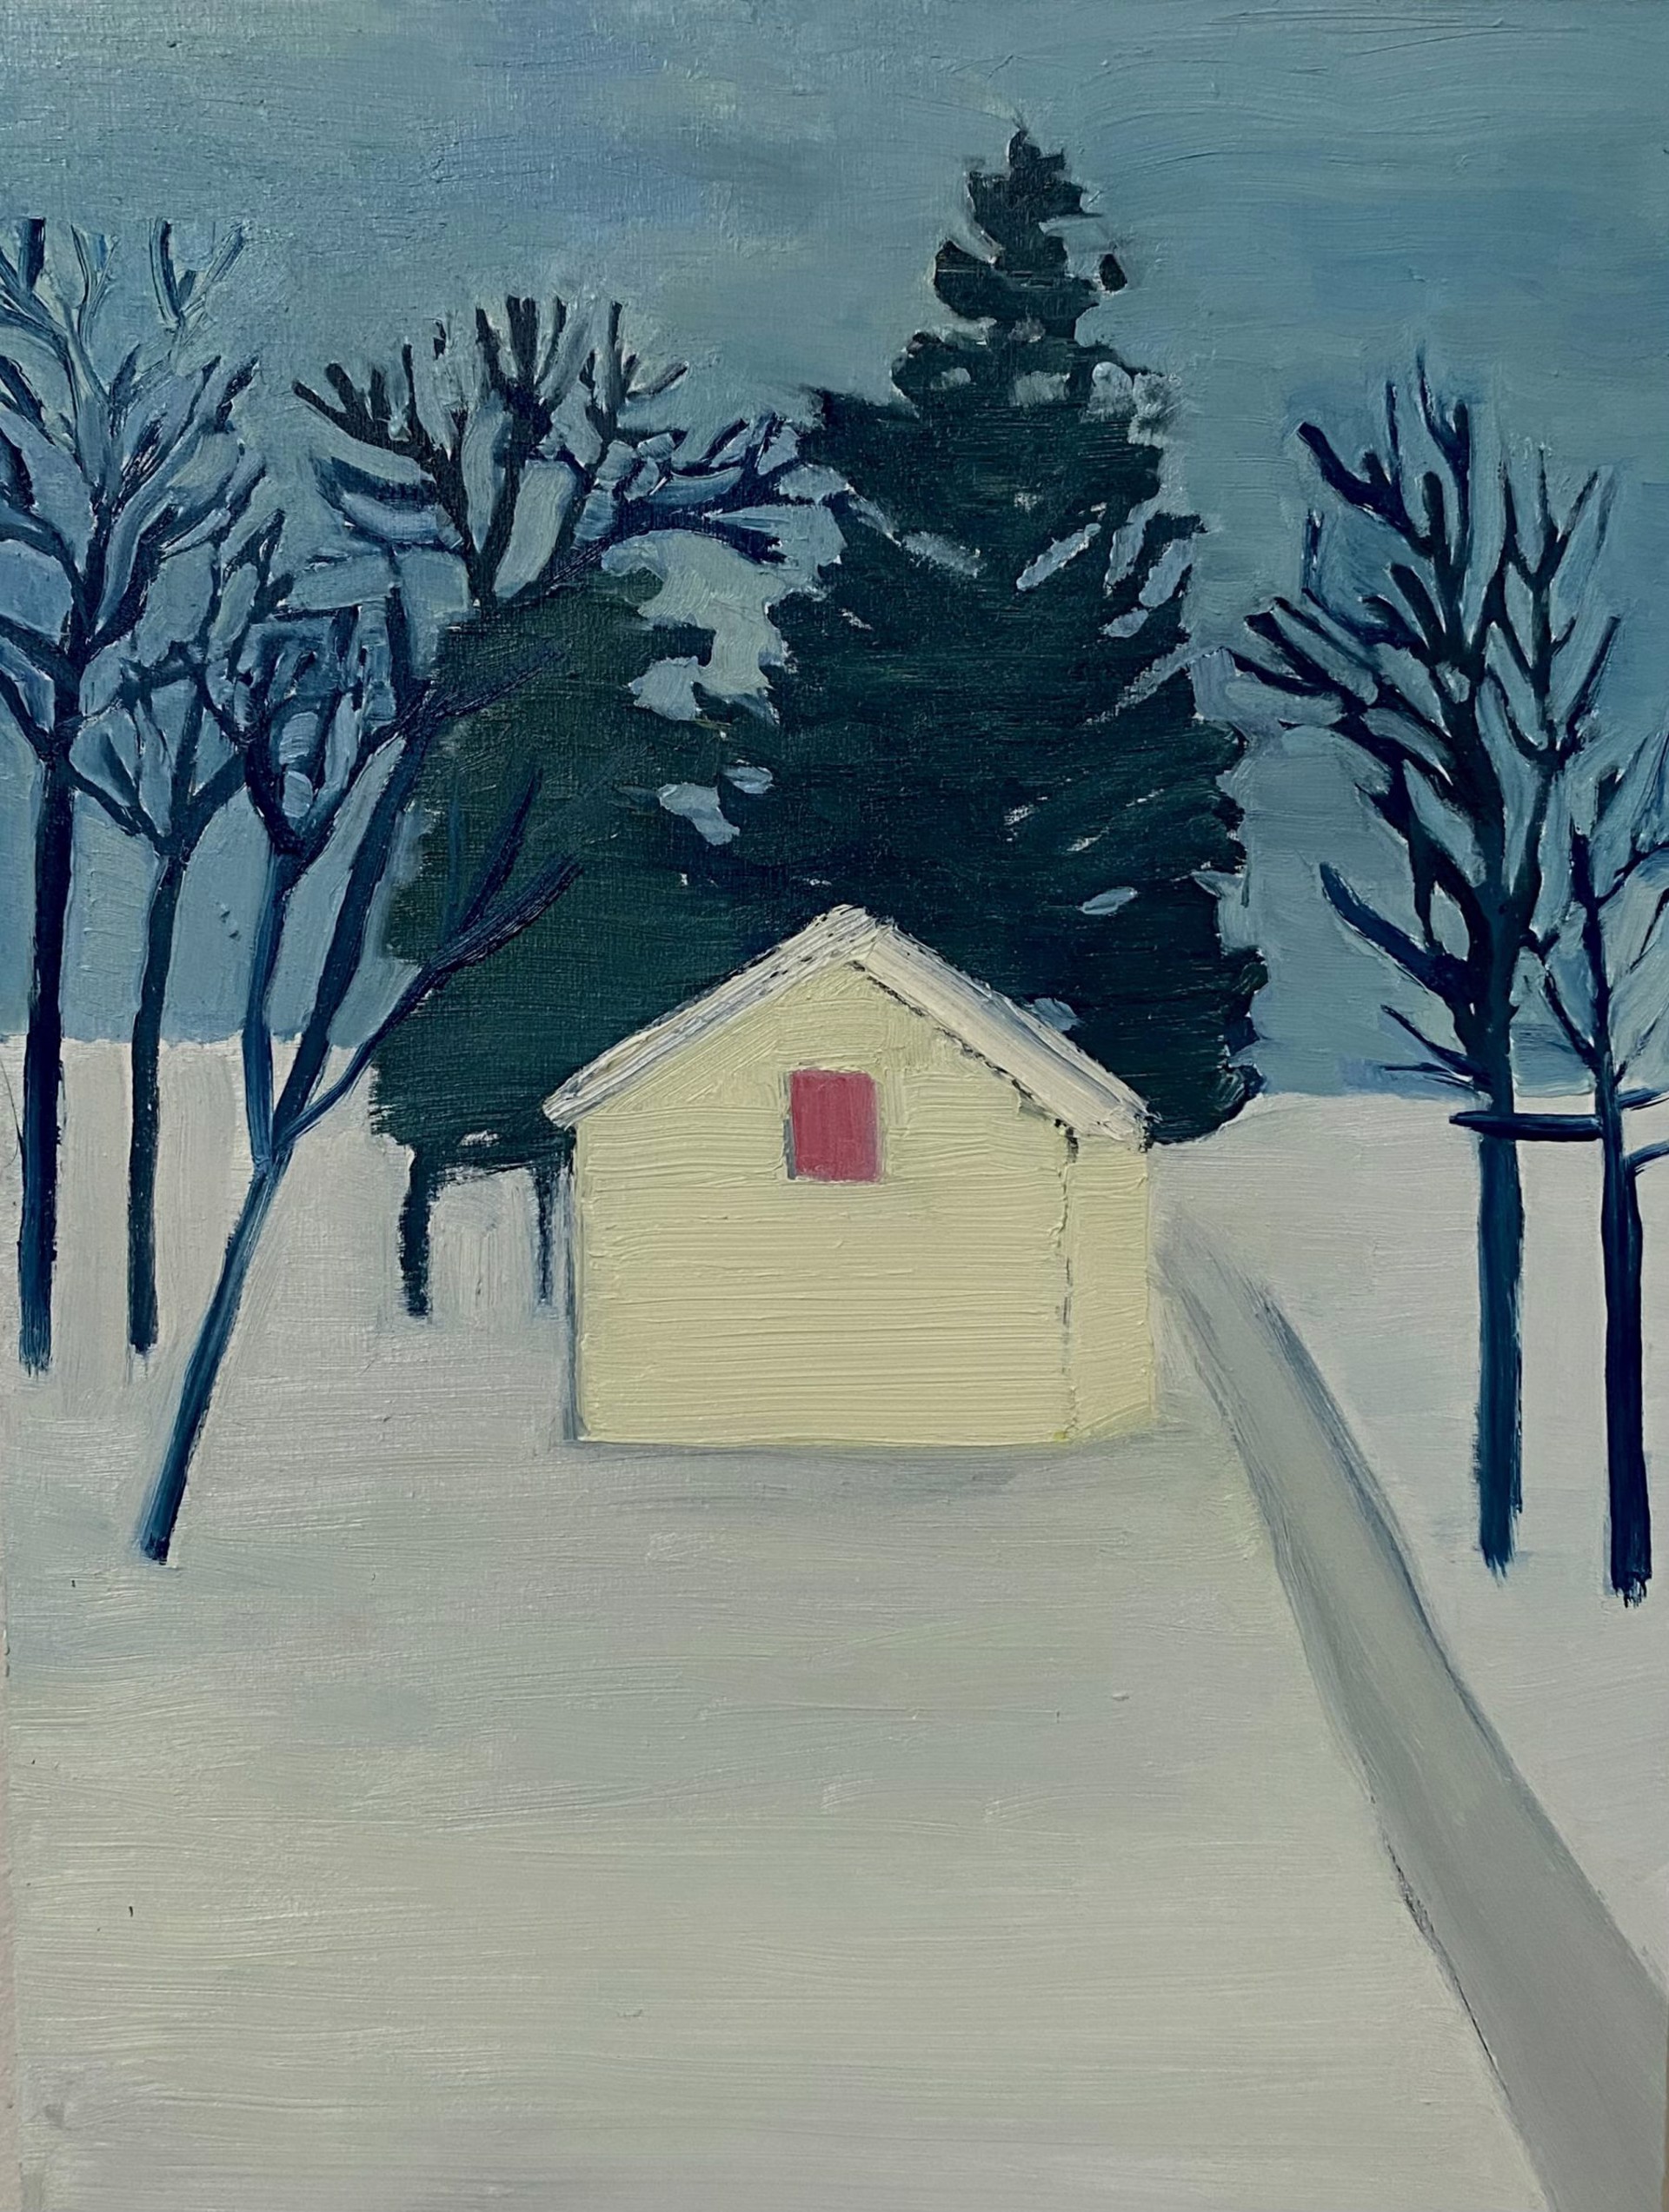 Woodshop in Snow by Tom Hammick